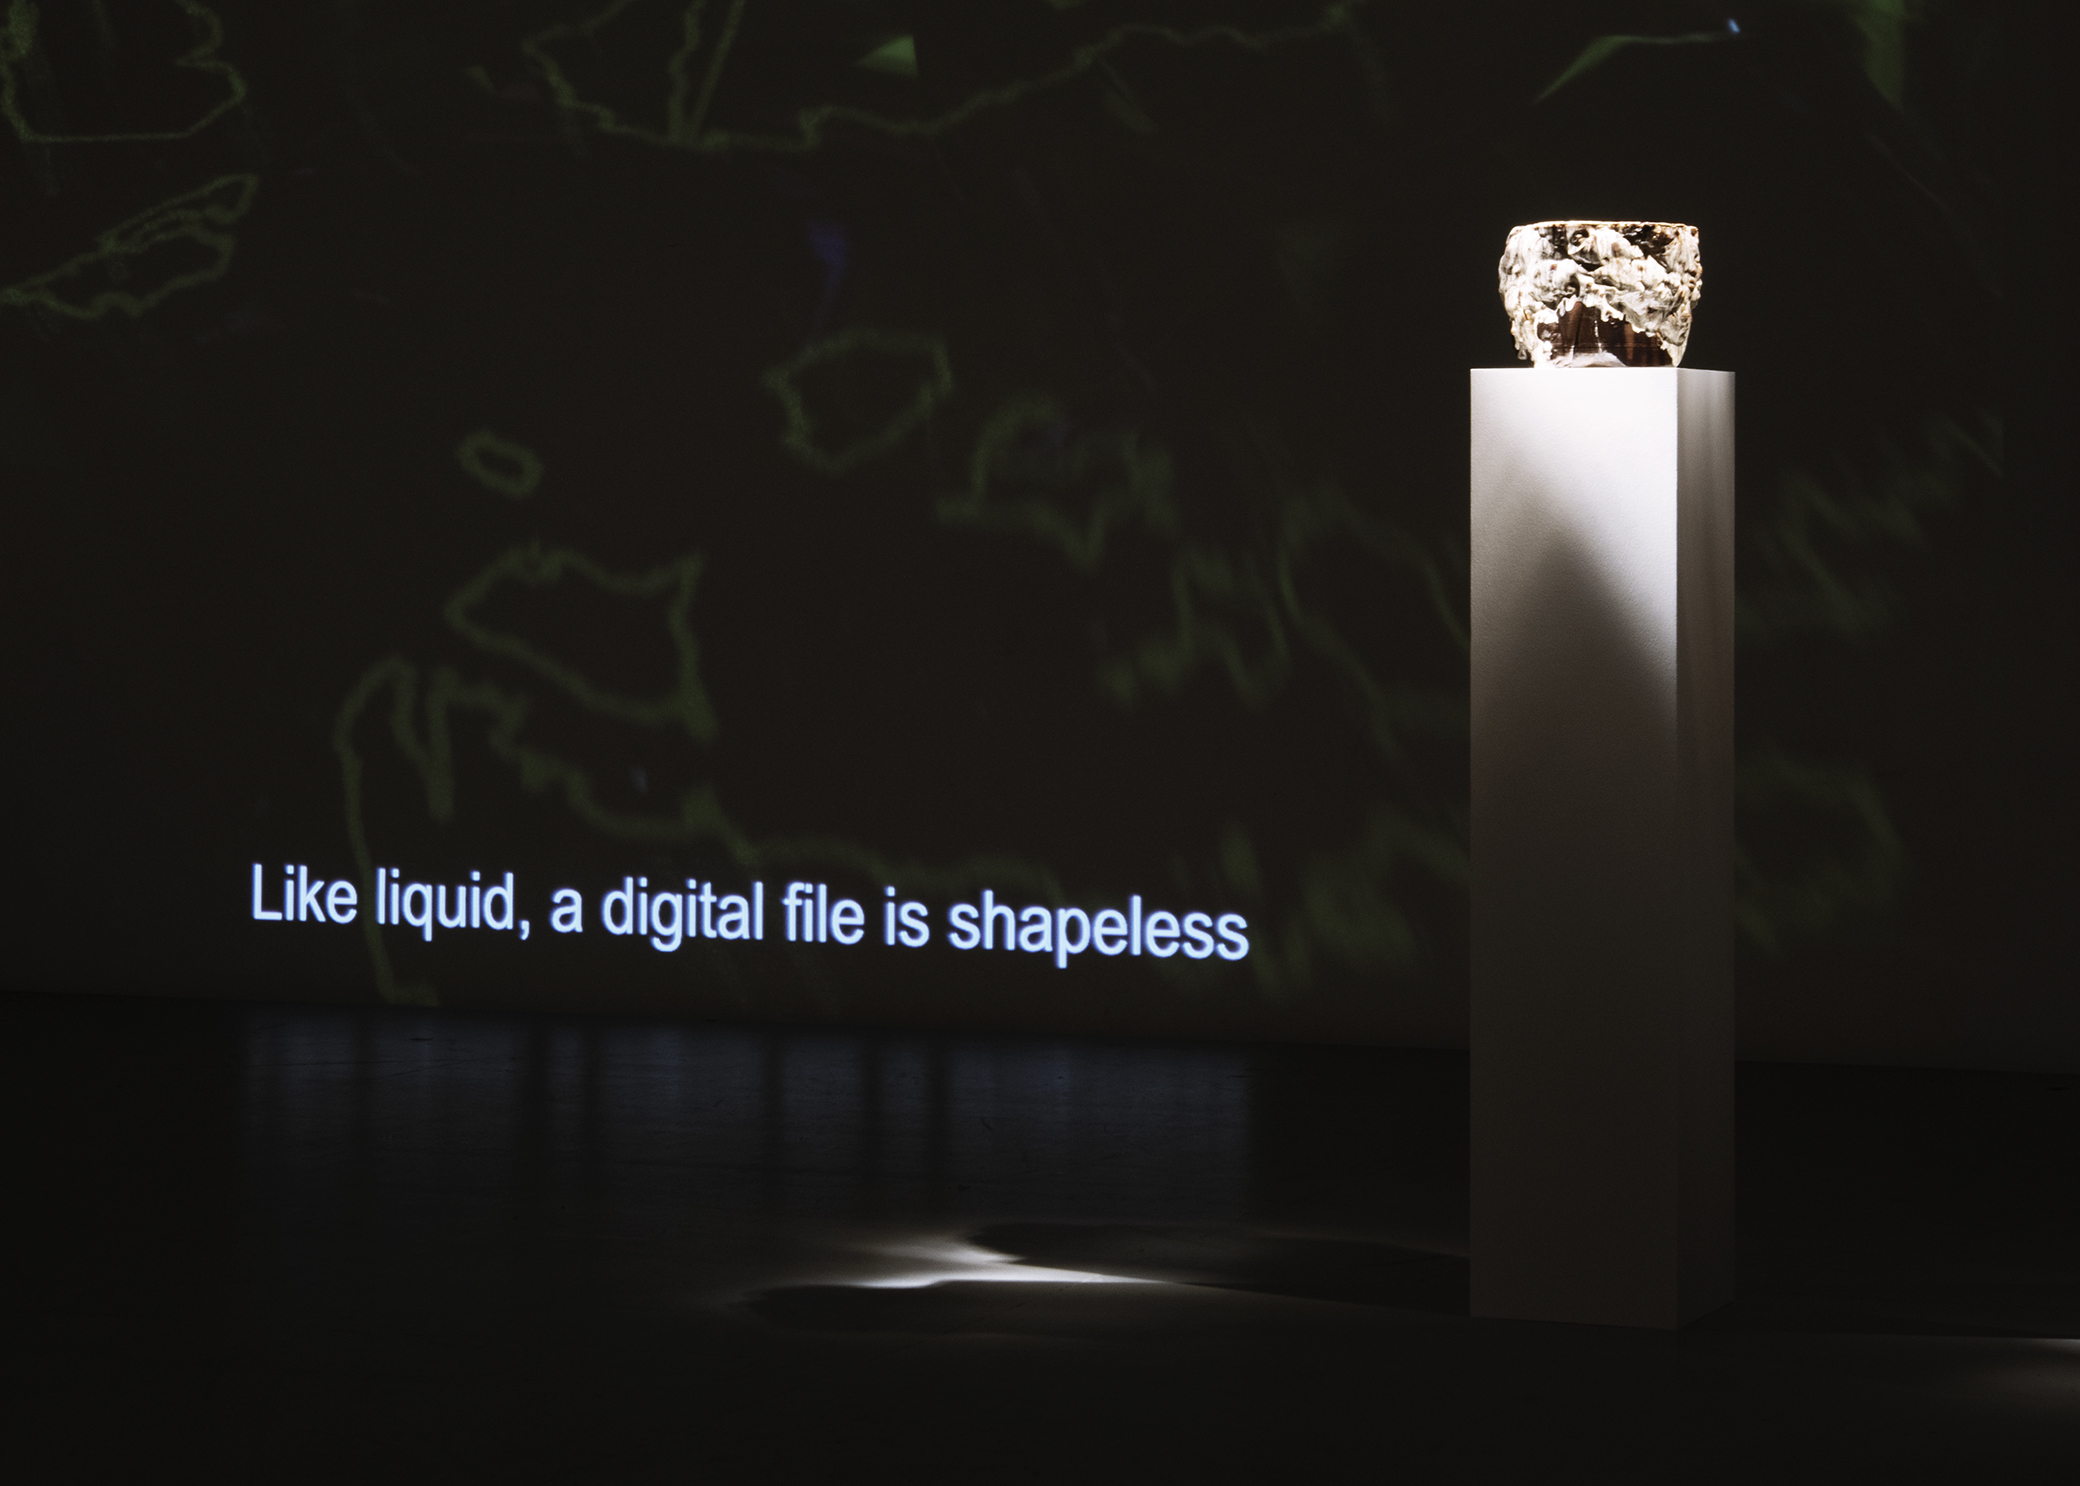 Brown ceramic vessel on a plint in a dark room, next to a projection that shows the words Like liquid, a digital file is shapeless.